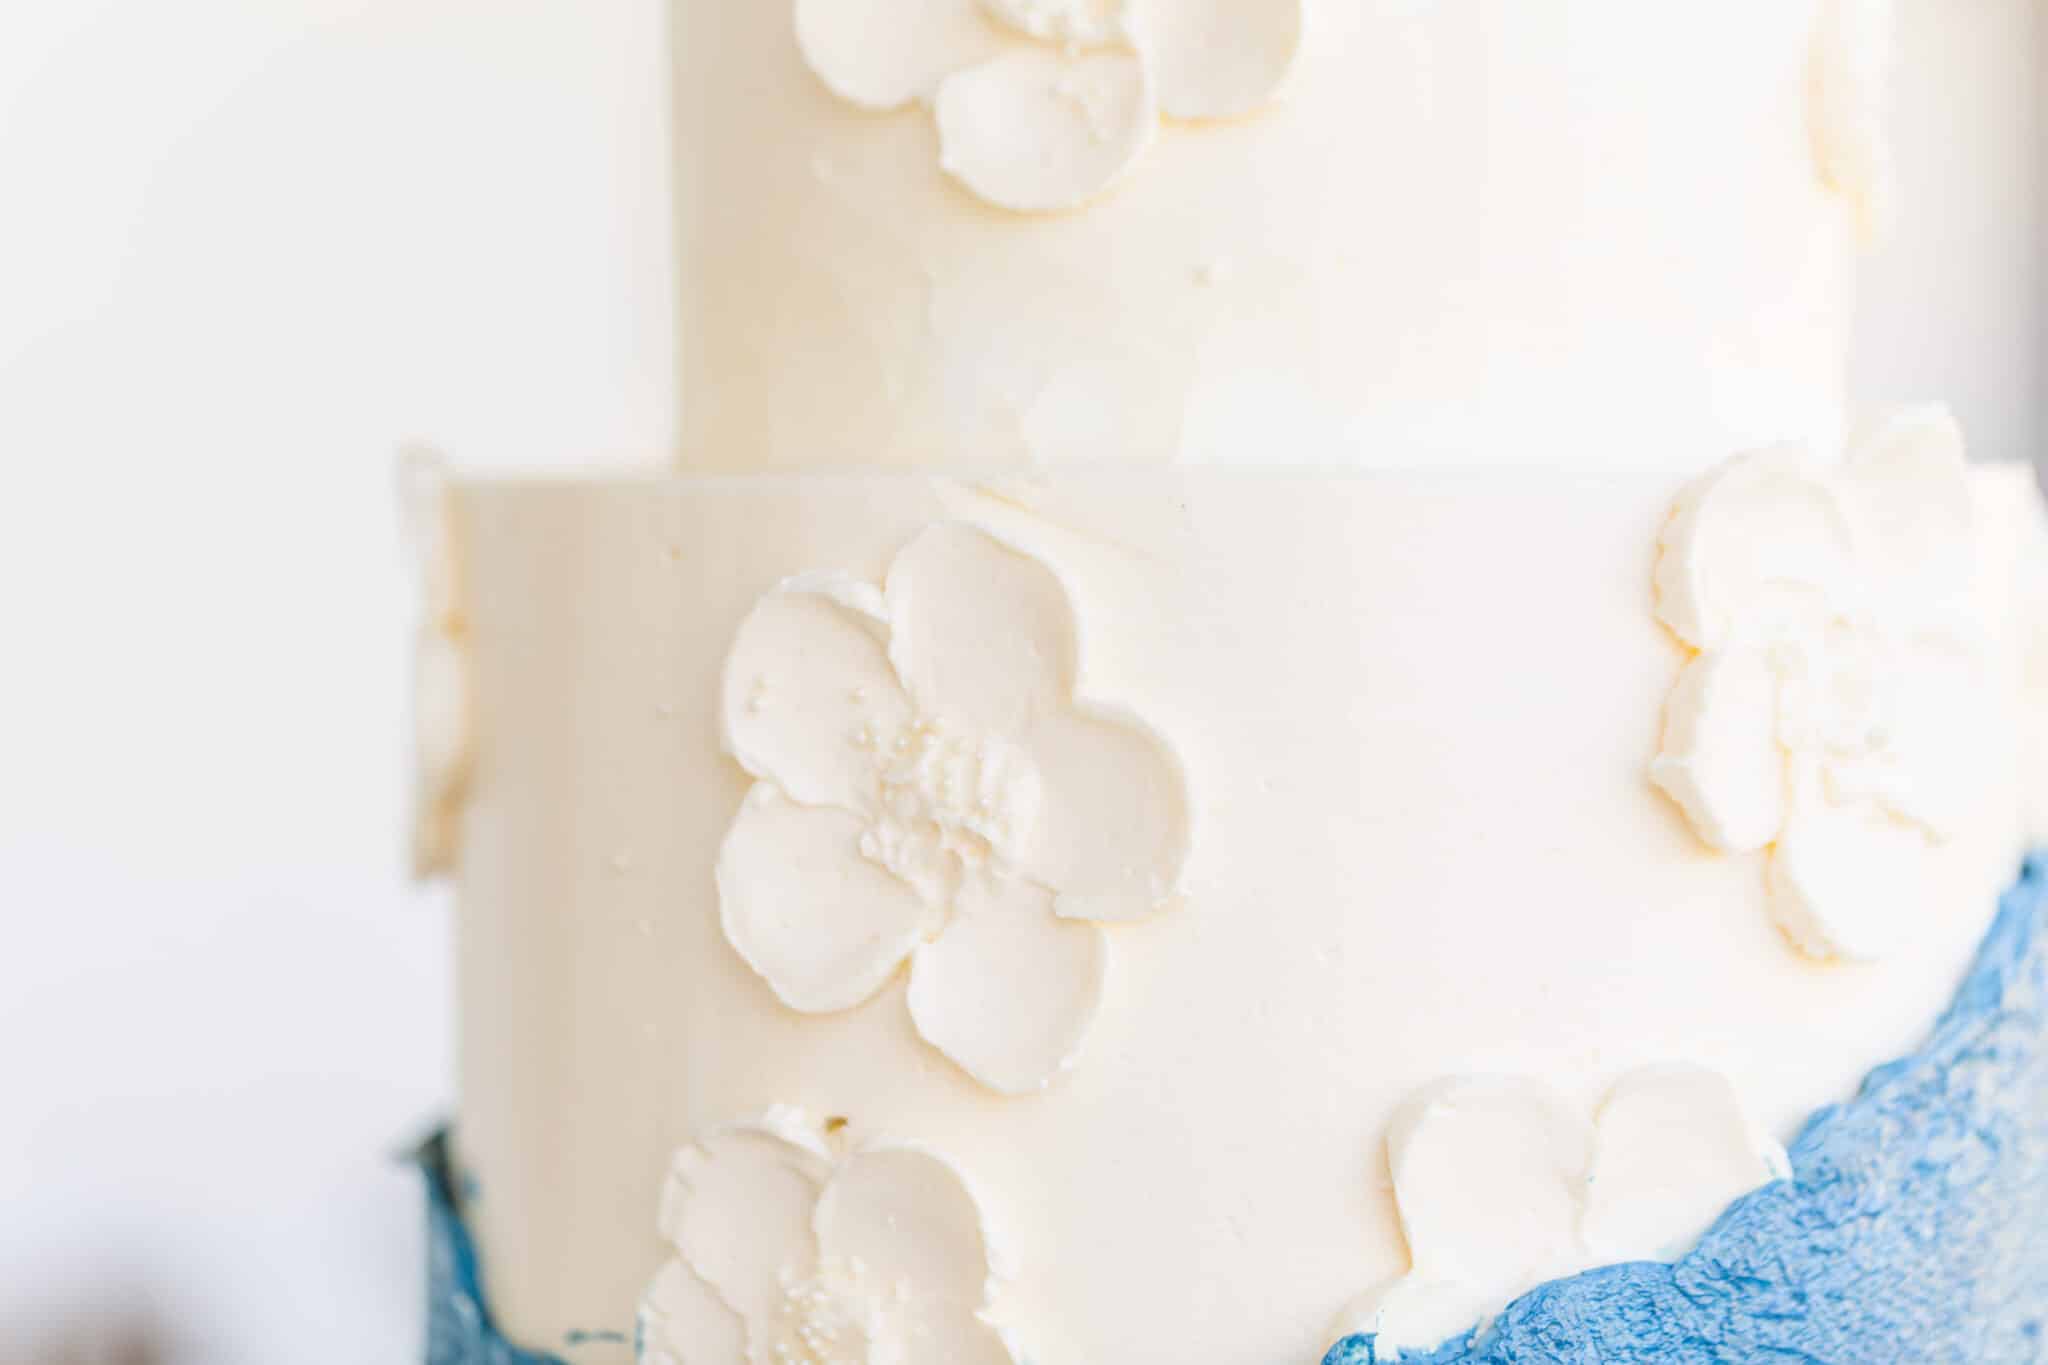 zoomed in image of cake with white fondant and decorated with white flowers made from frosting